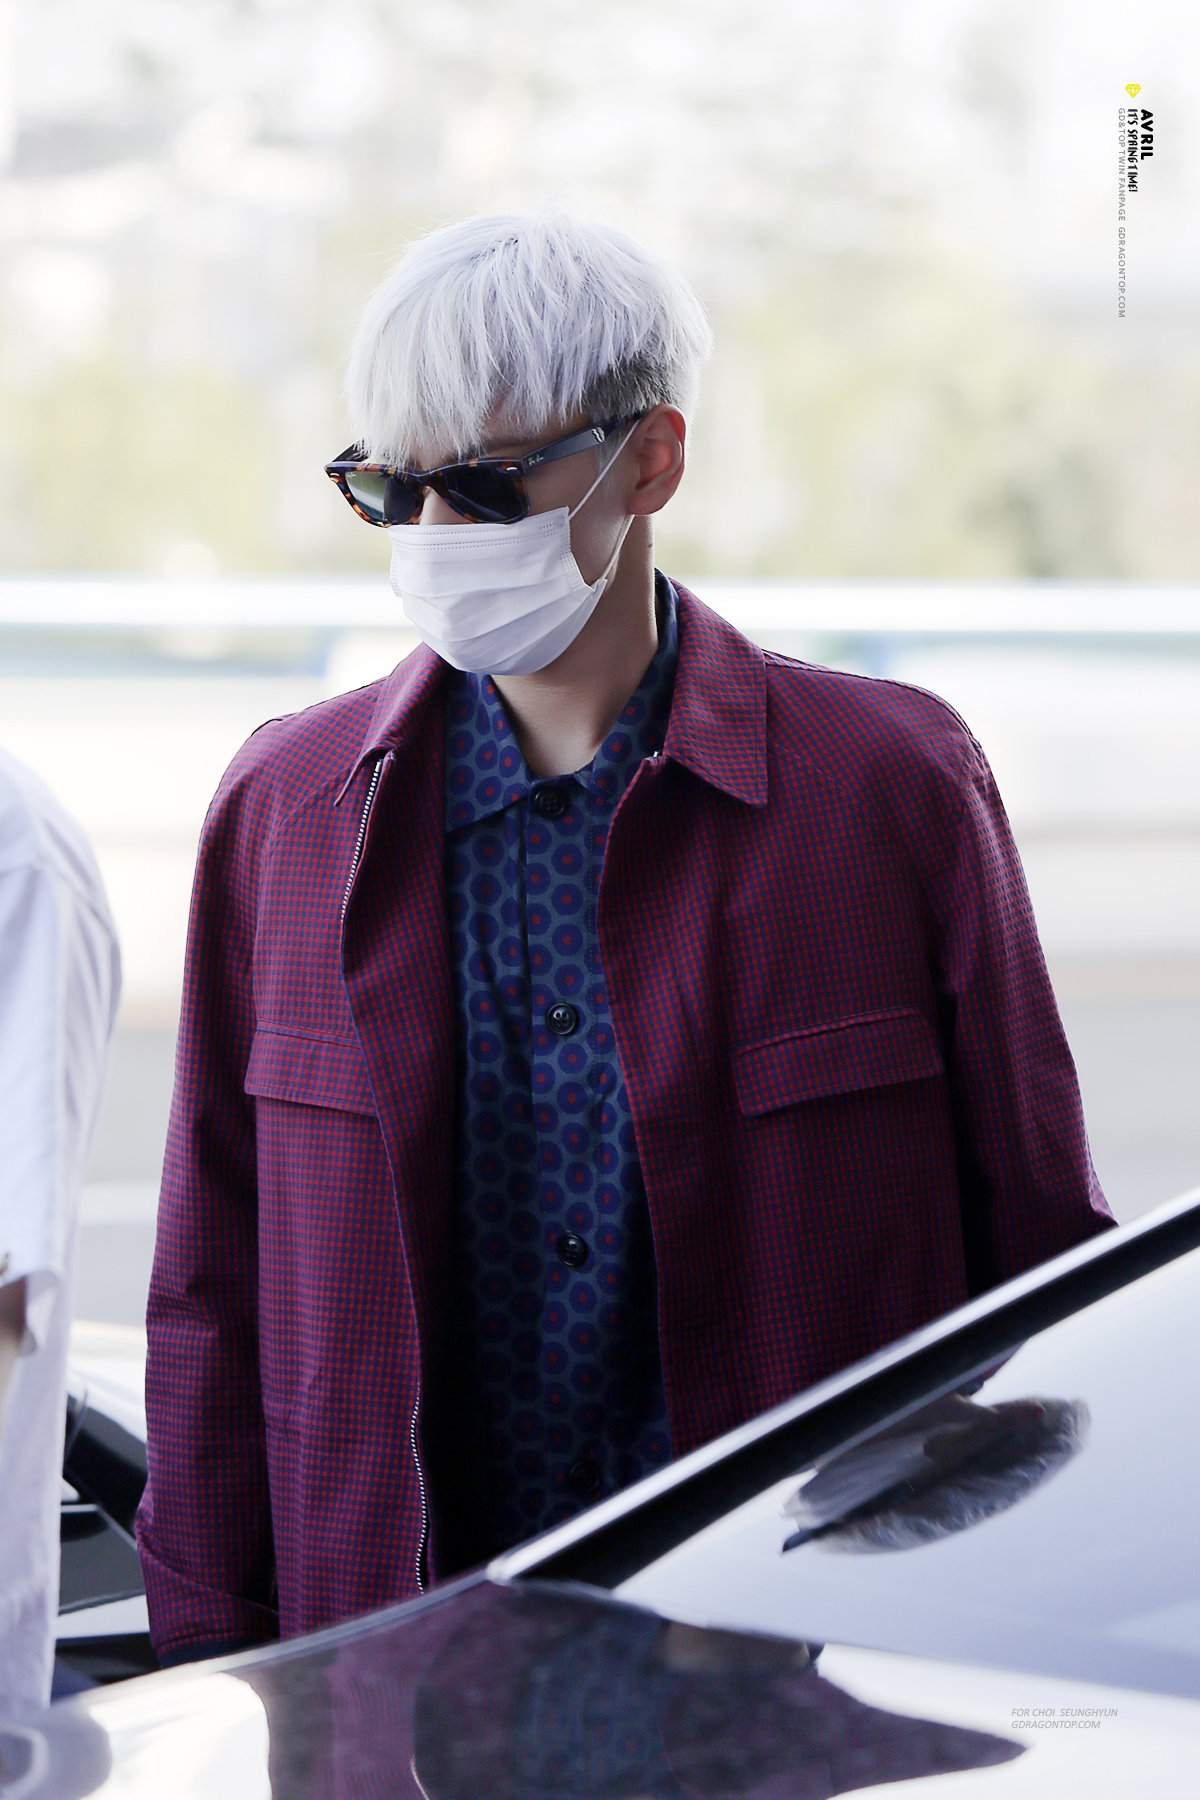 TOP departure Seoul to Osaka by avril_gdtop 2015-08-21 (3).jpg